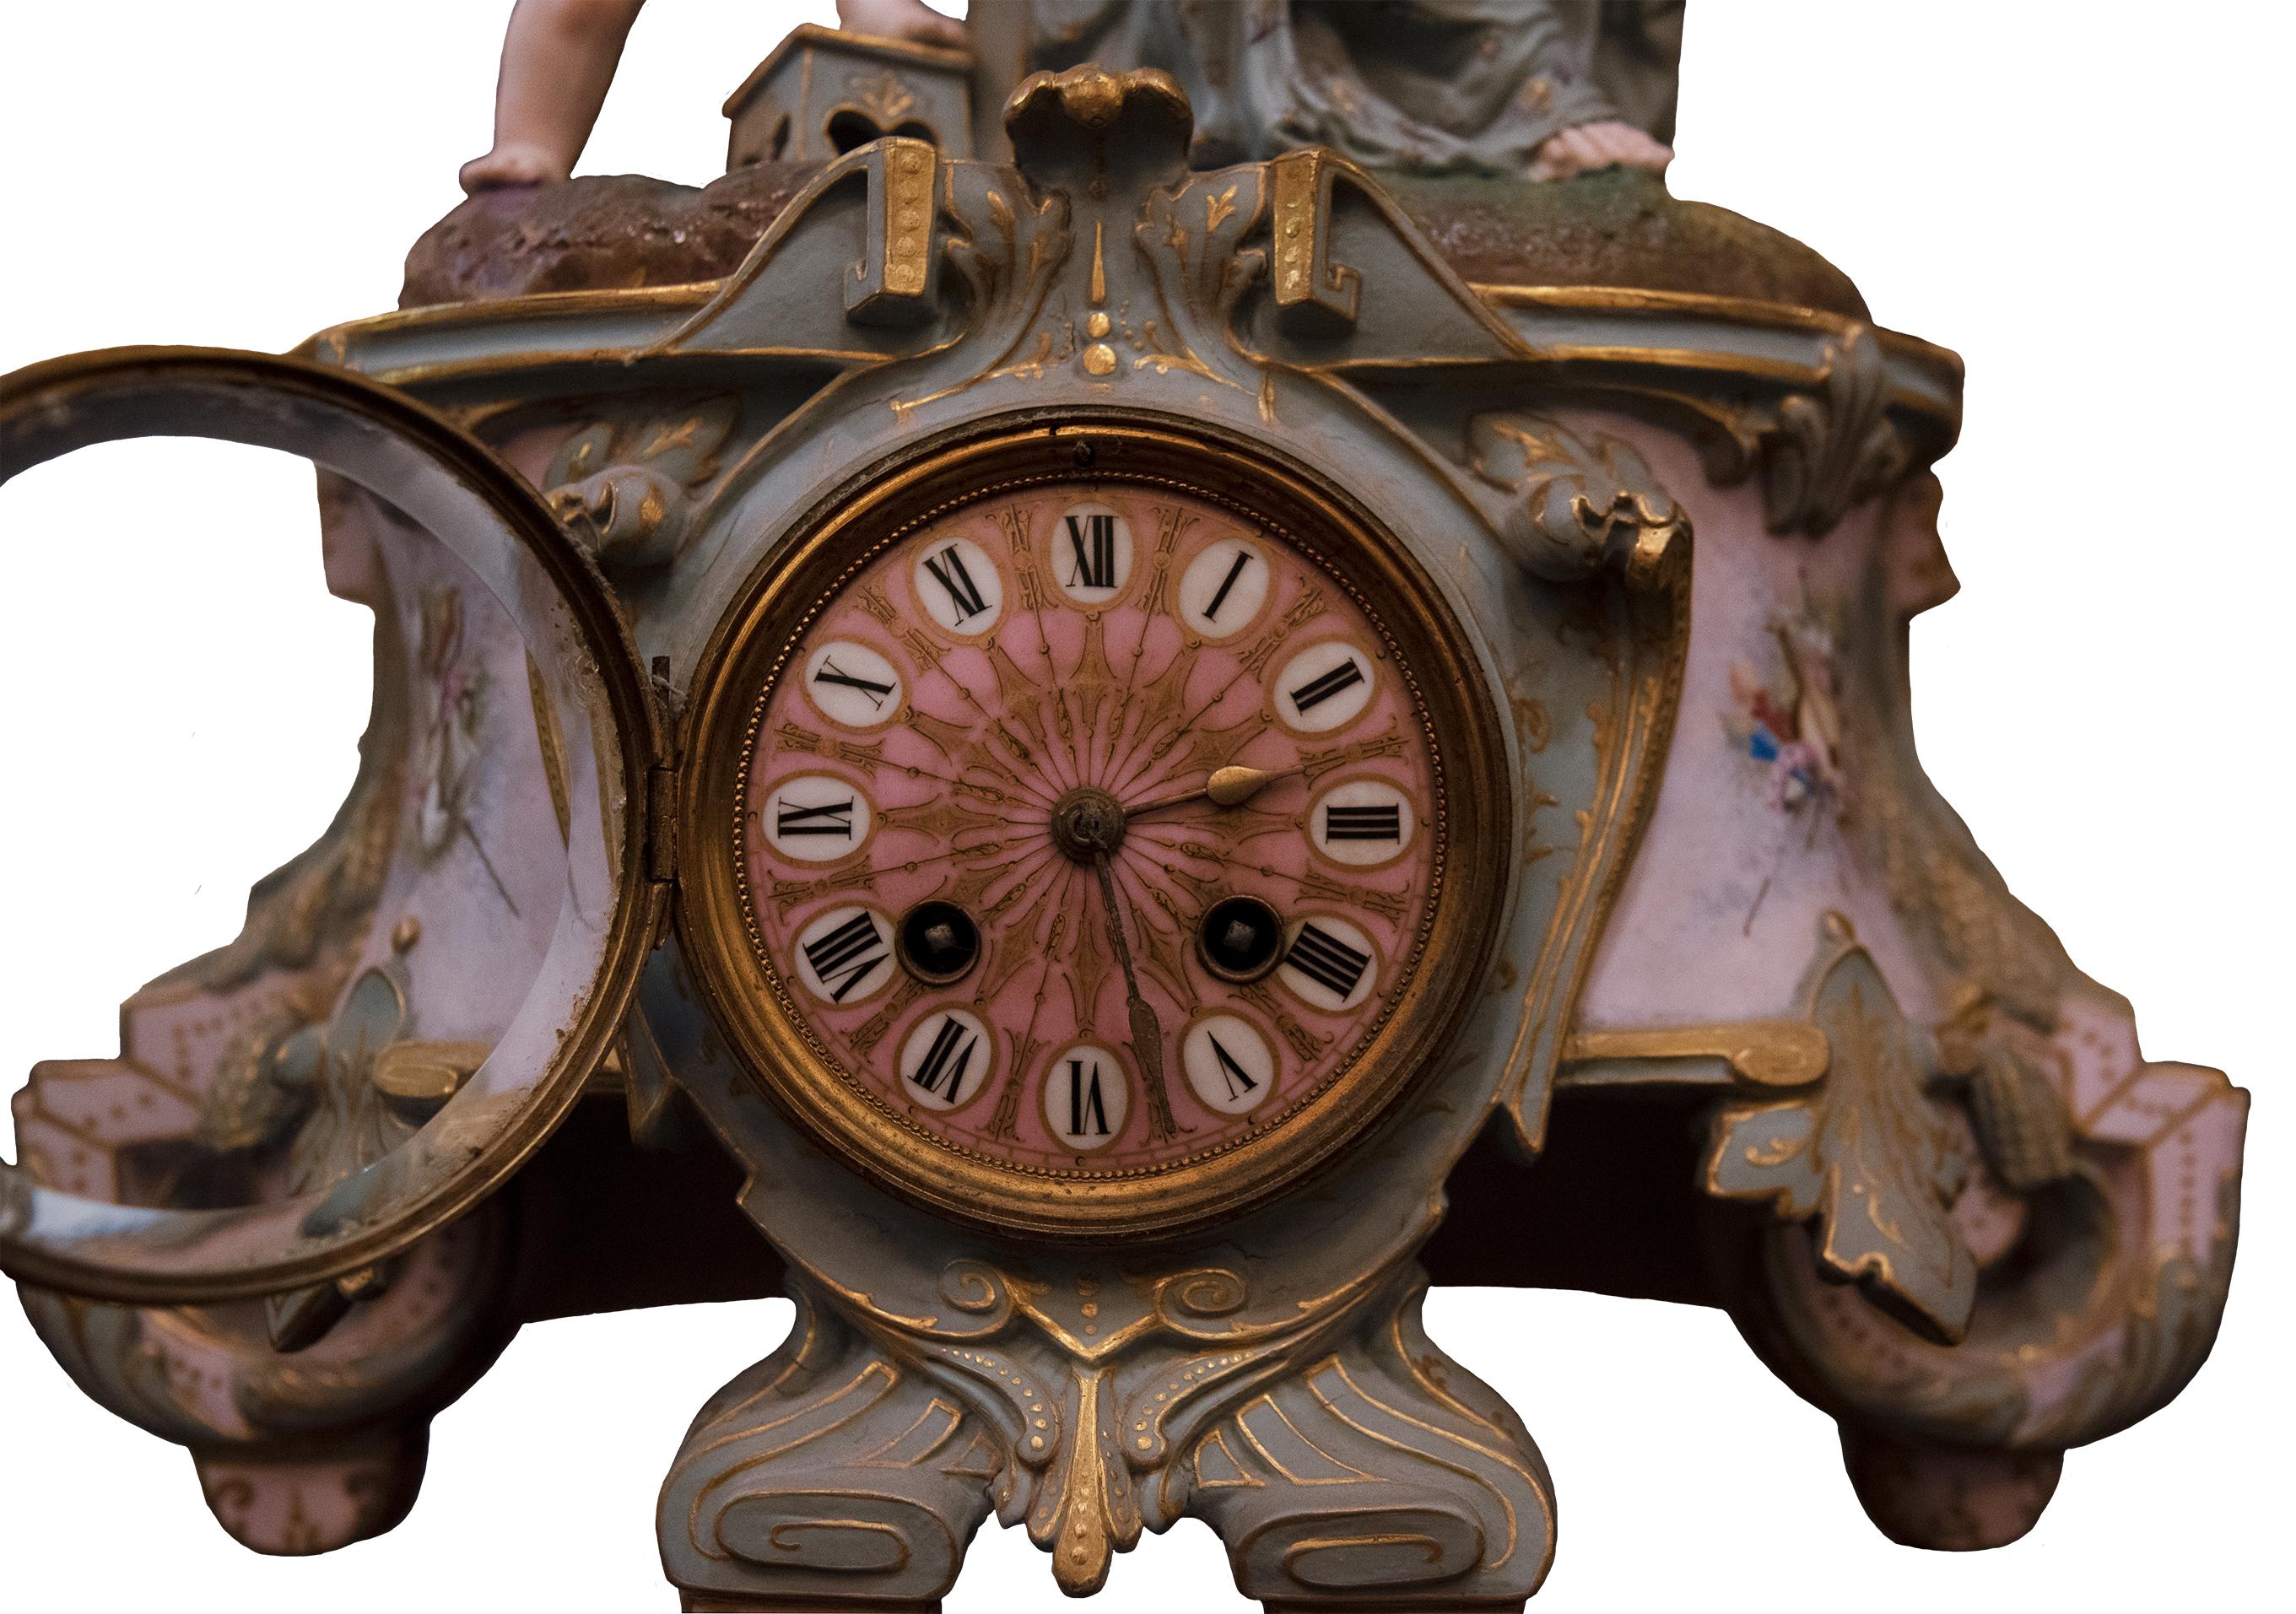 A two-piece French porcelain clock.

Circa 19th century.